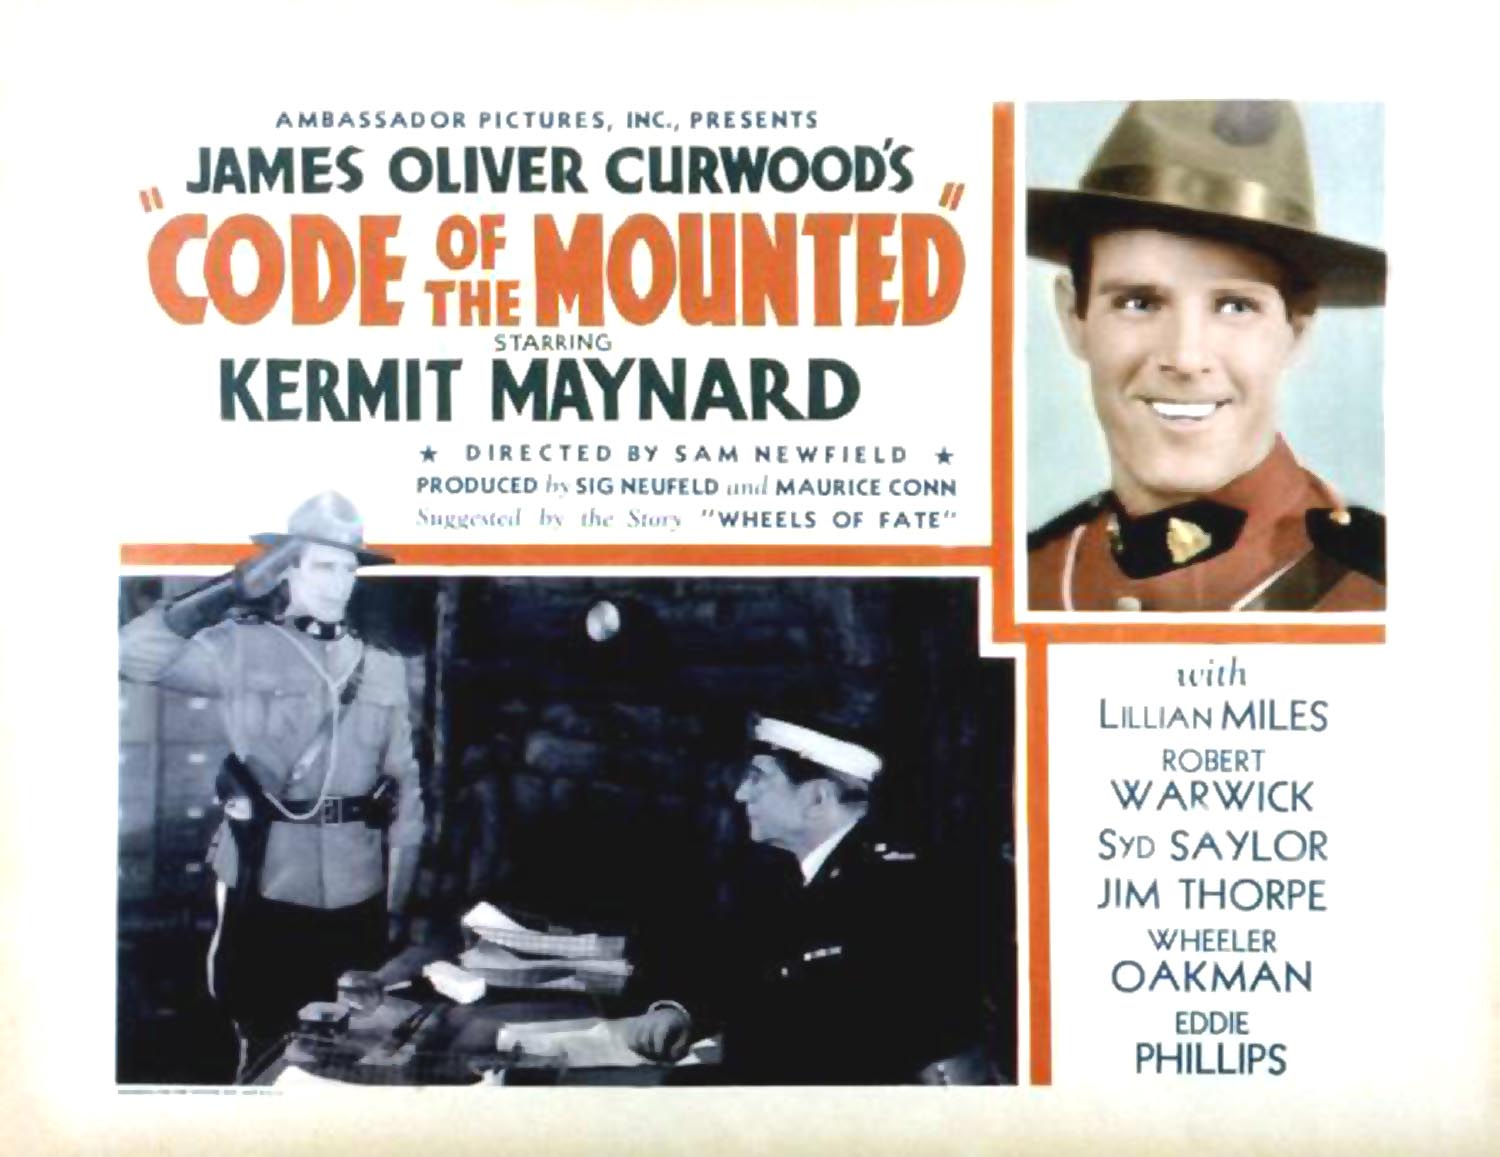 CODE OF THE MOUNTED